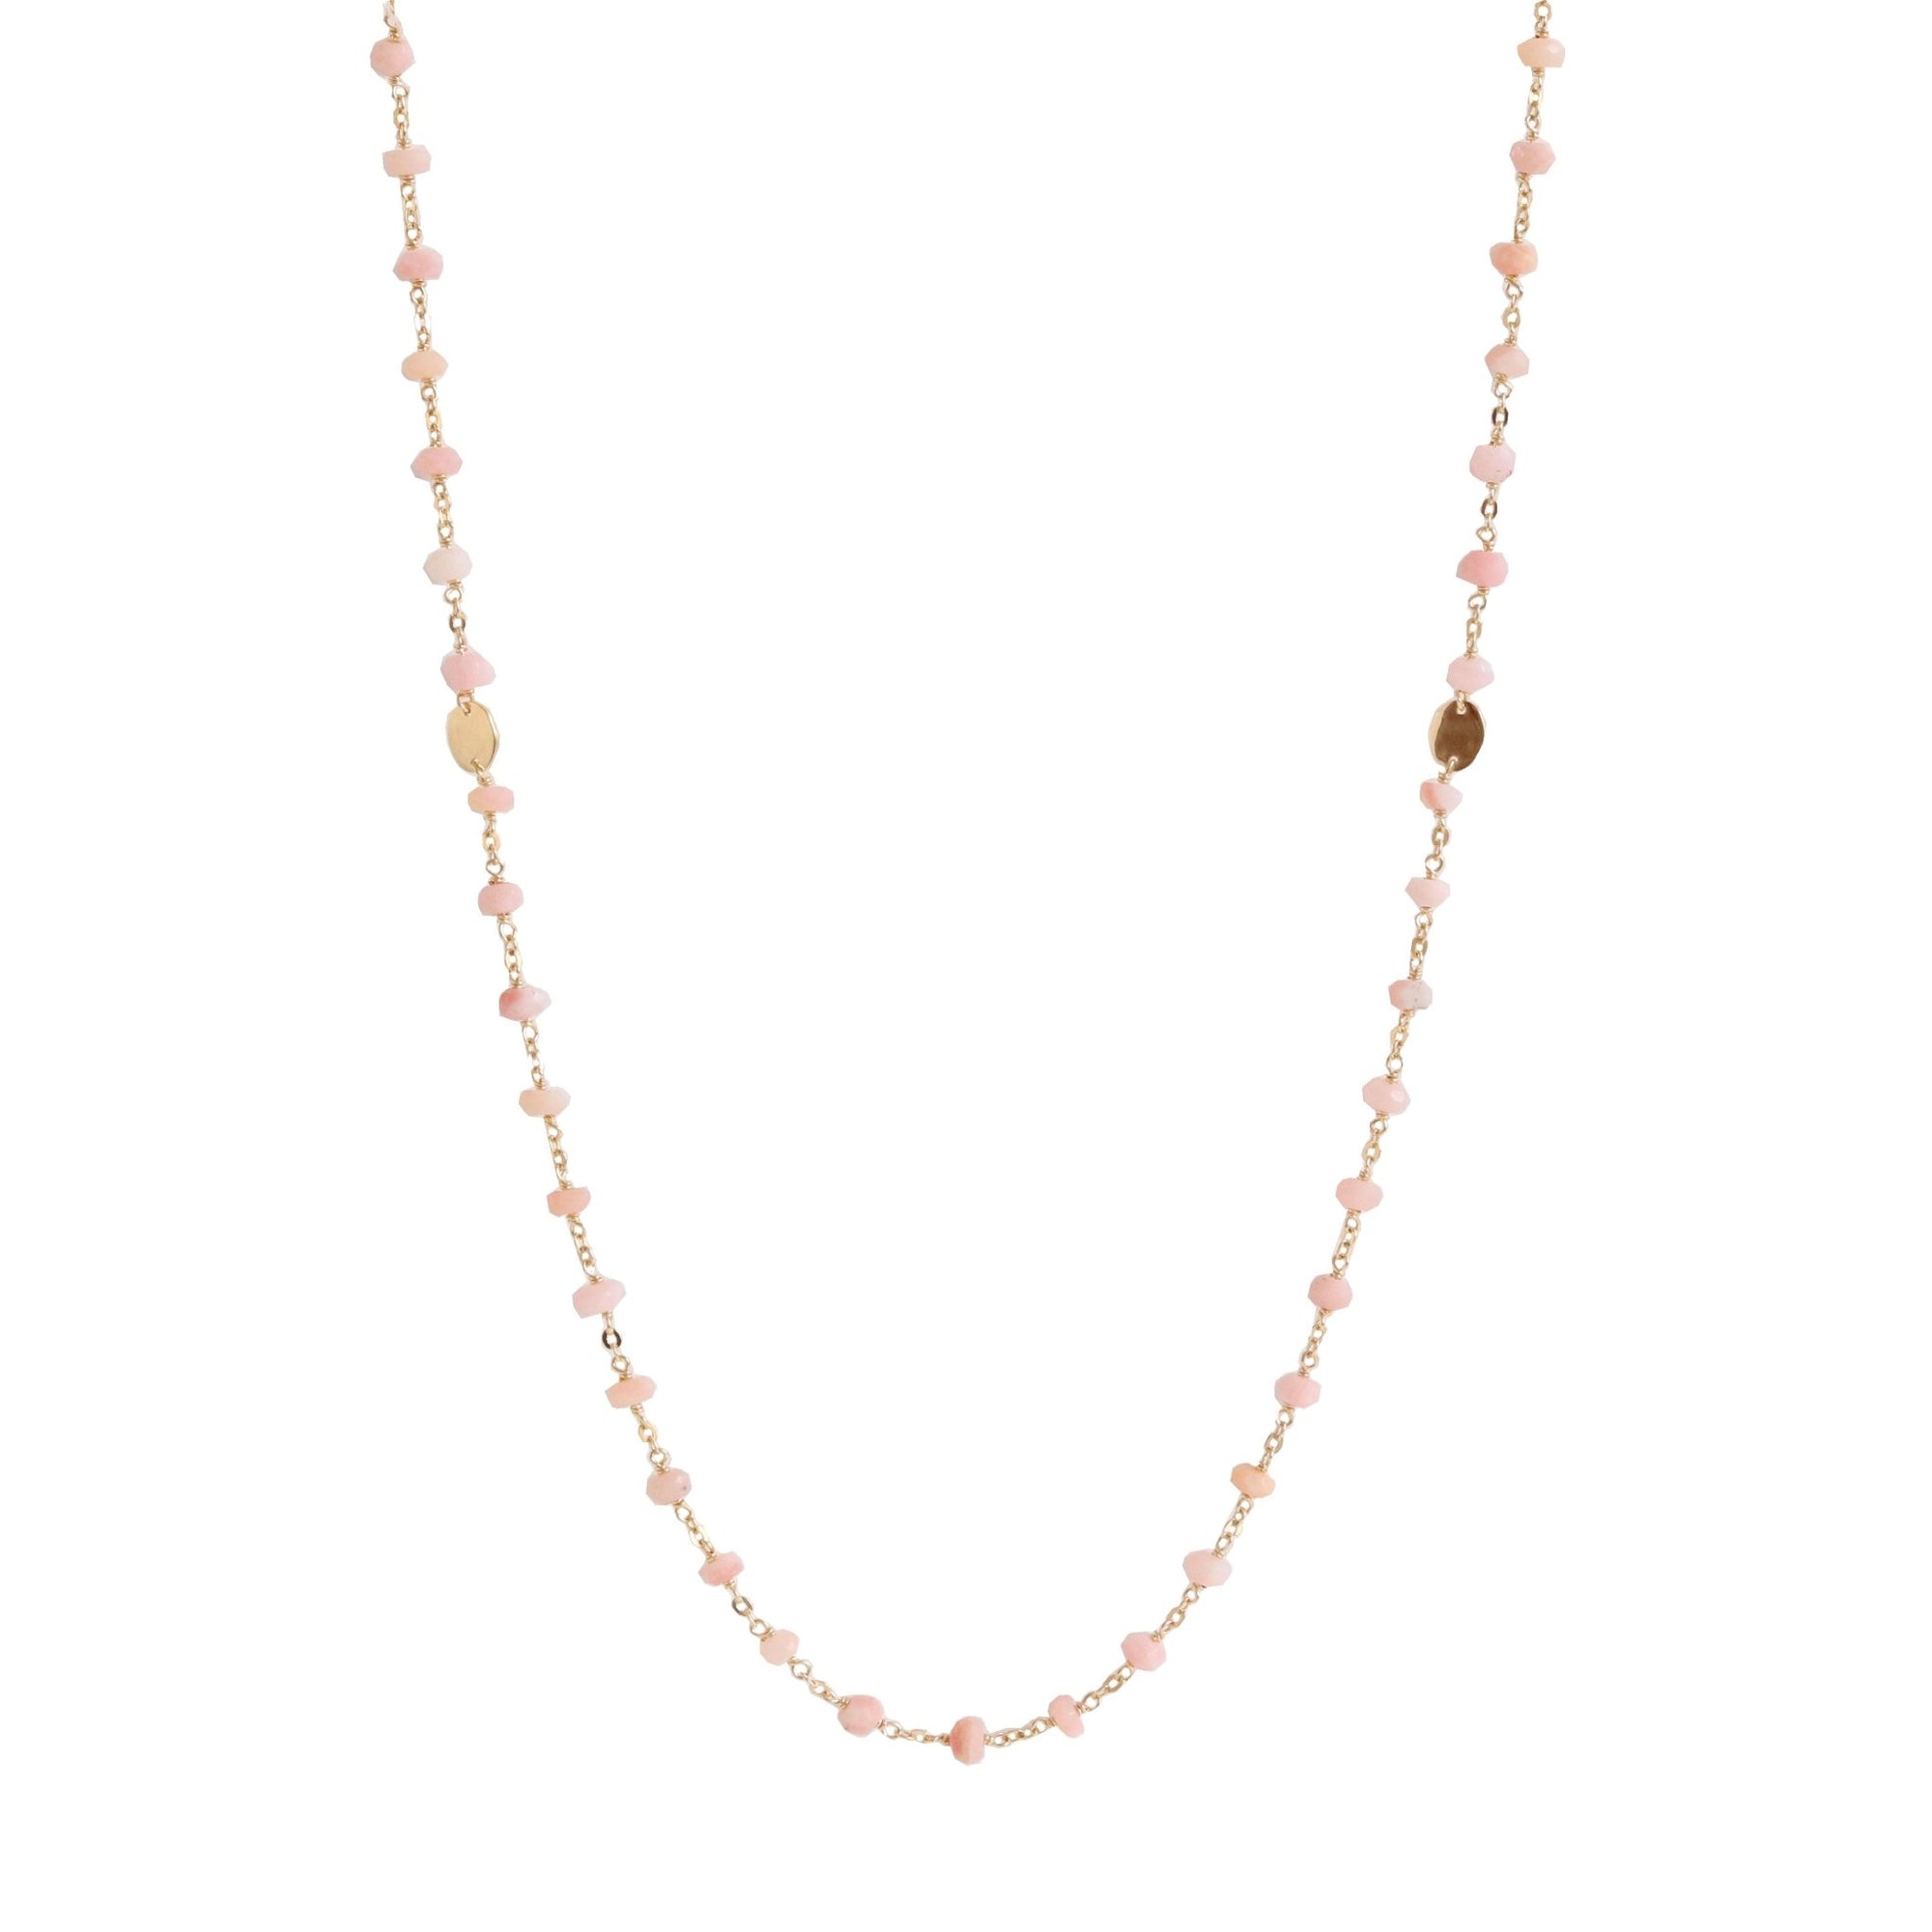 ICONIC LONG BEADED NECKLACE - PINK OPAL & GOLD 34" - SO PRETTY CARA COTTER